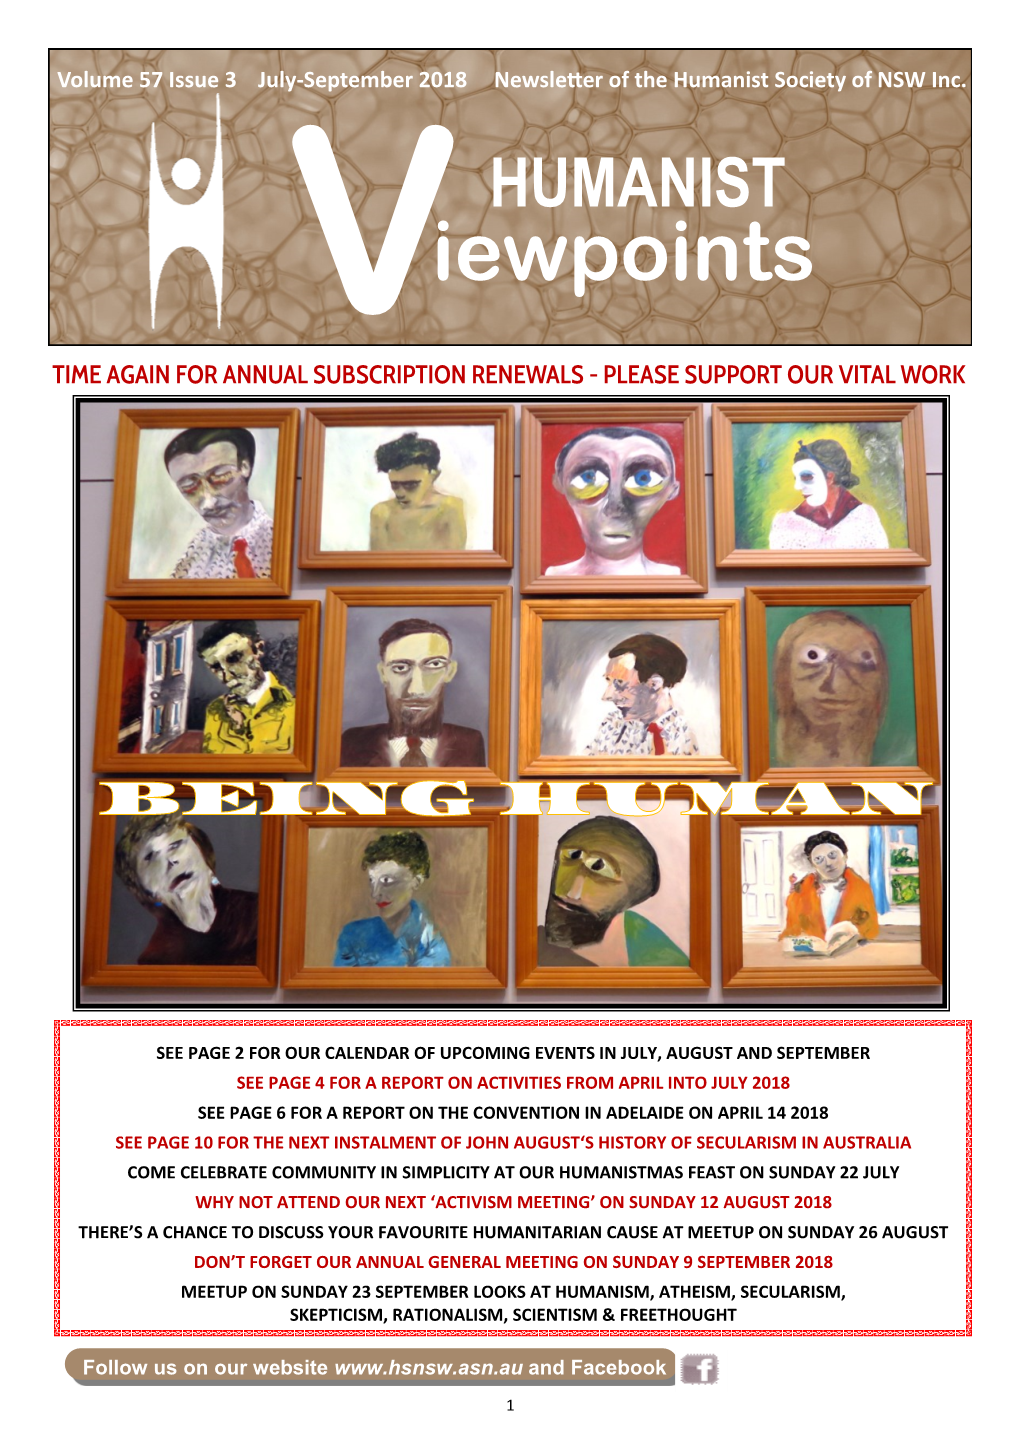 Iewpoints TIME AGAIN for ANNUAL SUBSCRIPTION RENEWALS - PLEASE SUPPORT OUR VITAL WORK